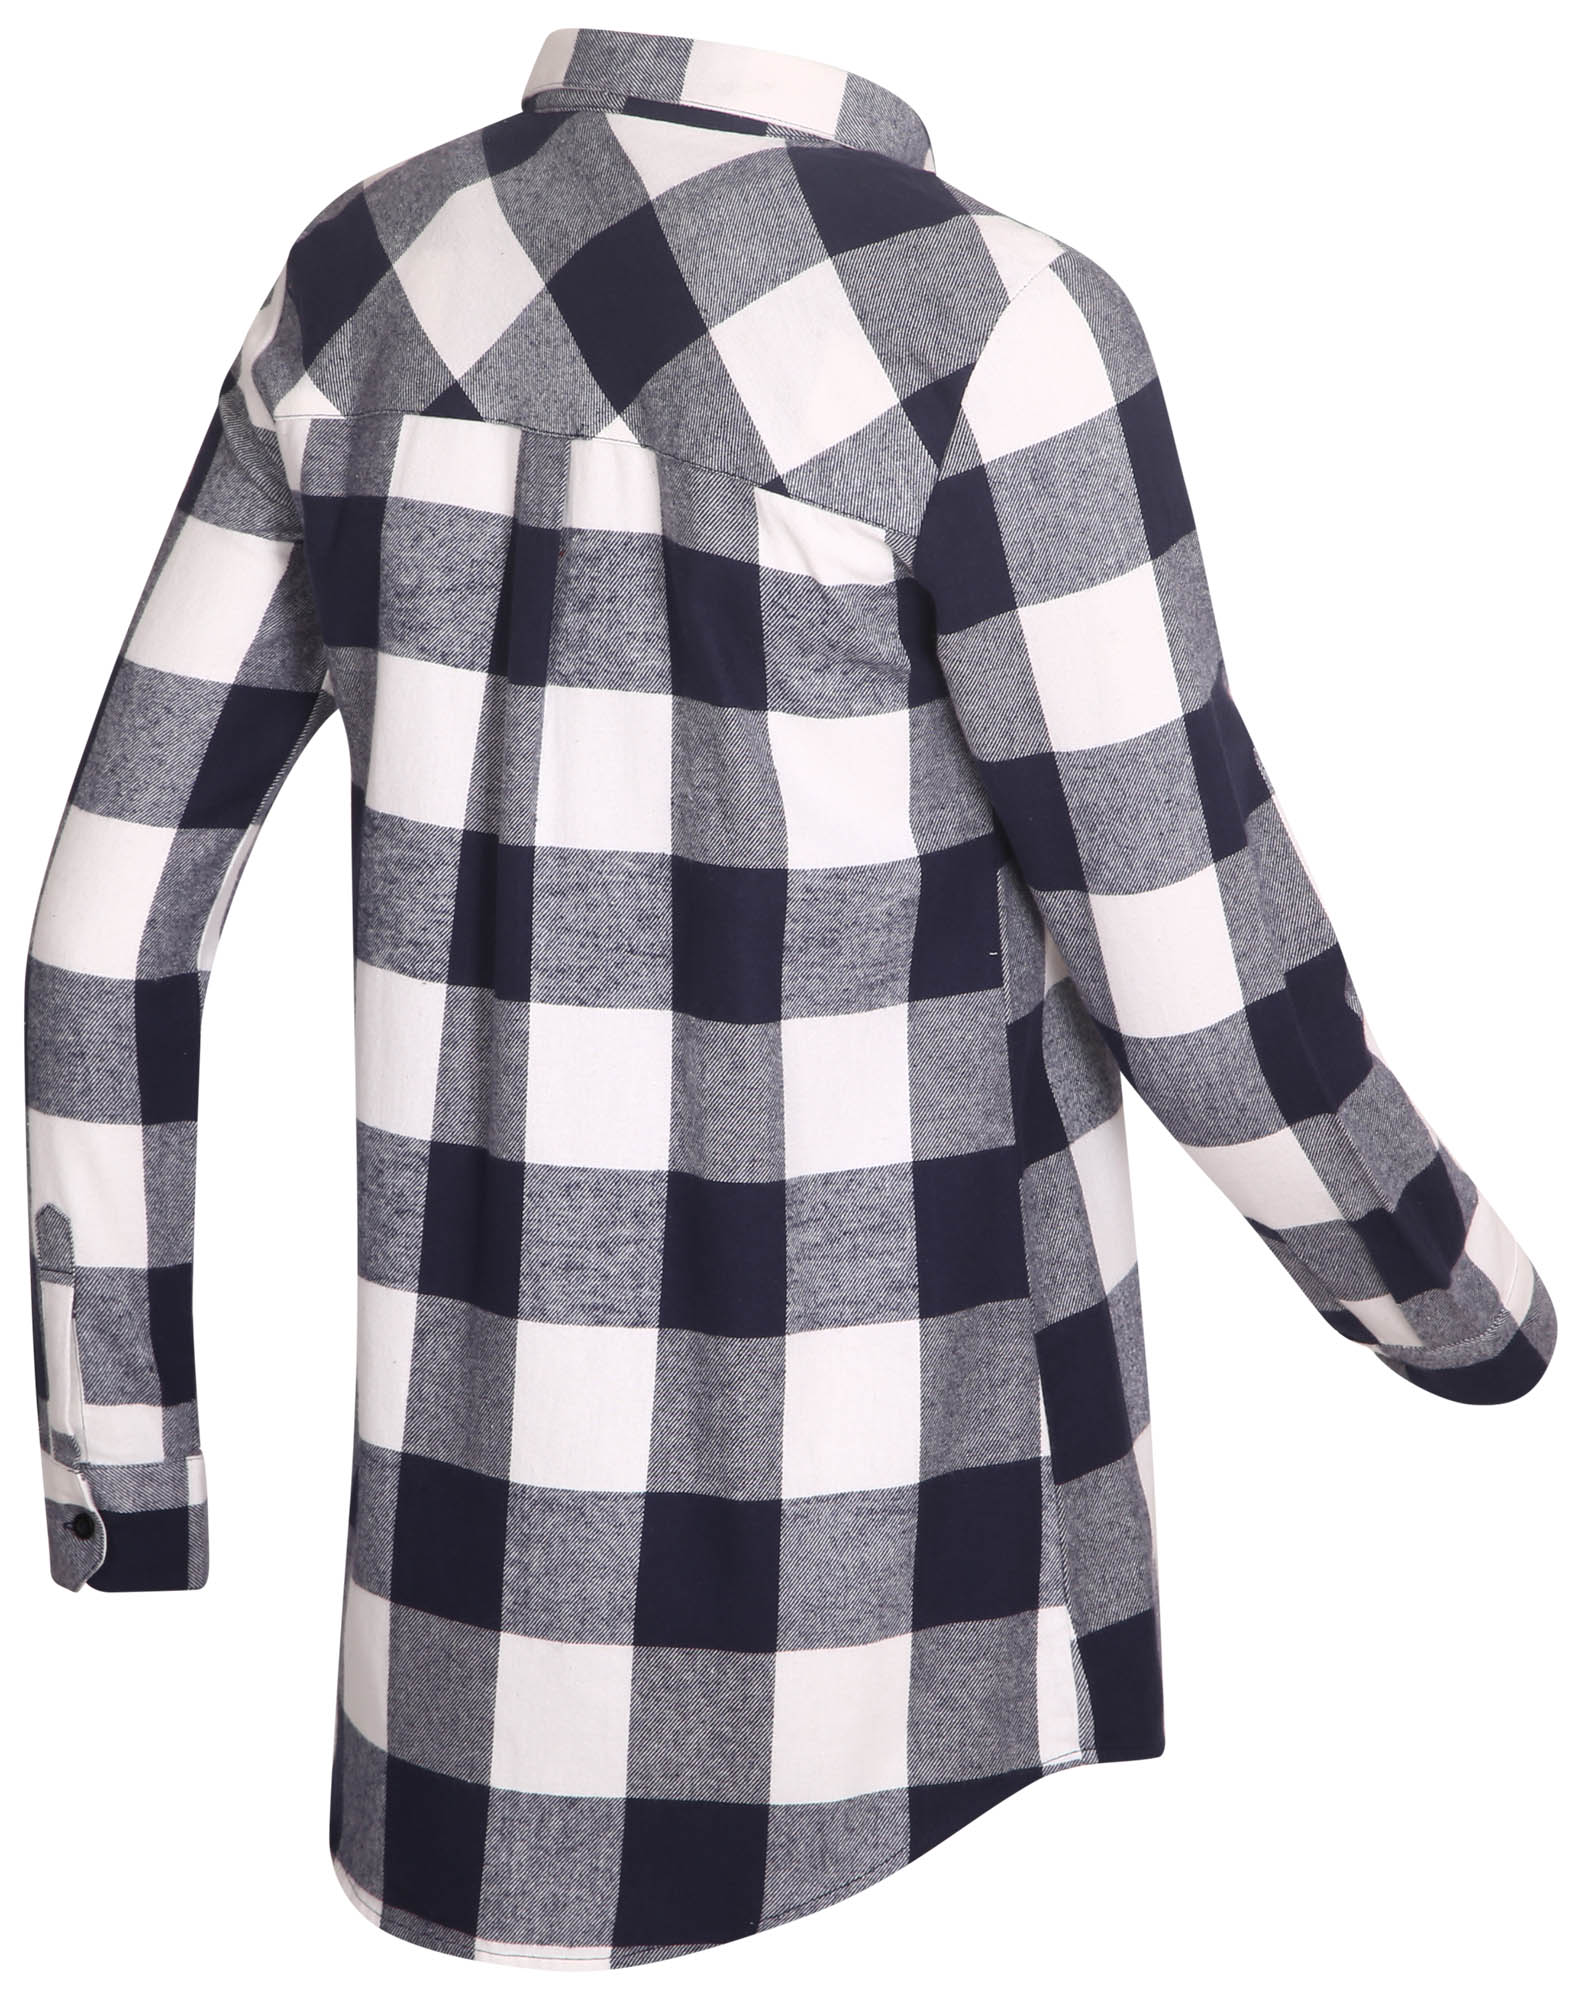 Damenbluse Flanell